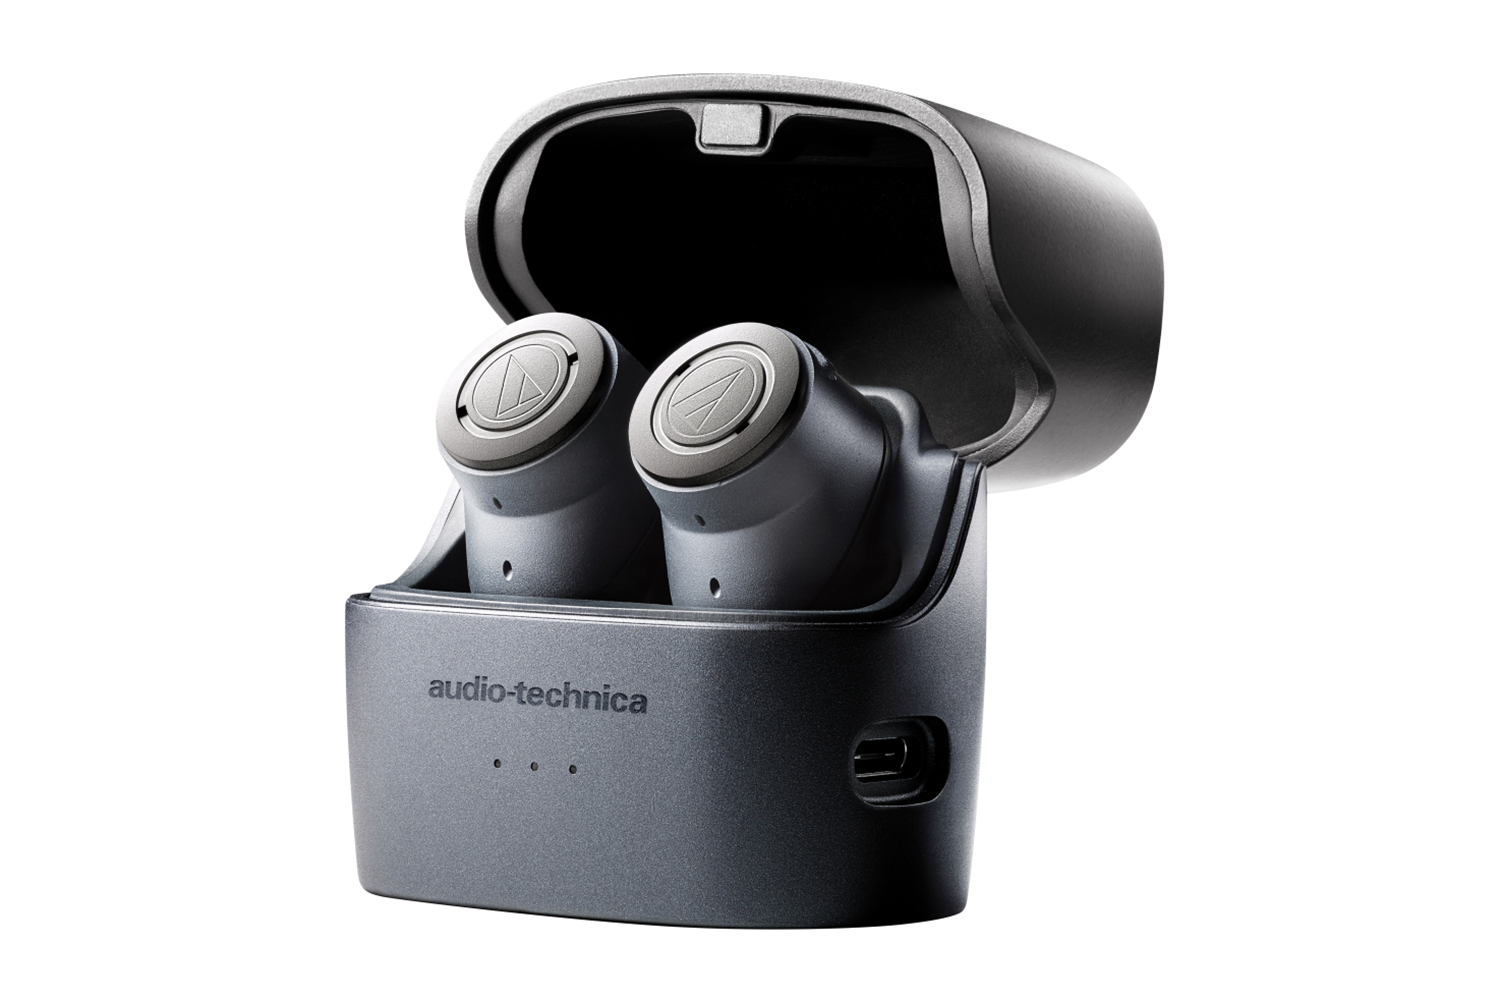 Audio-Technica Debuts Its First True Wireless Earbuds With ANC